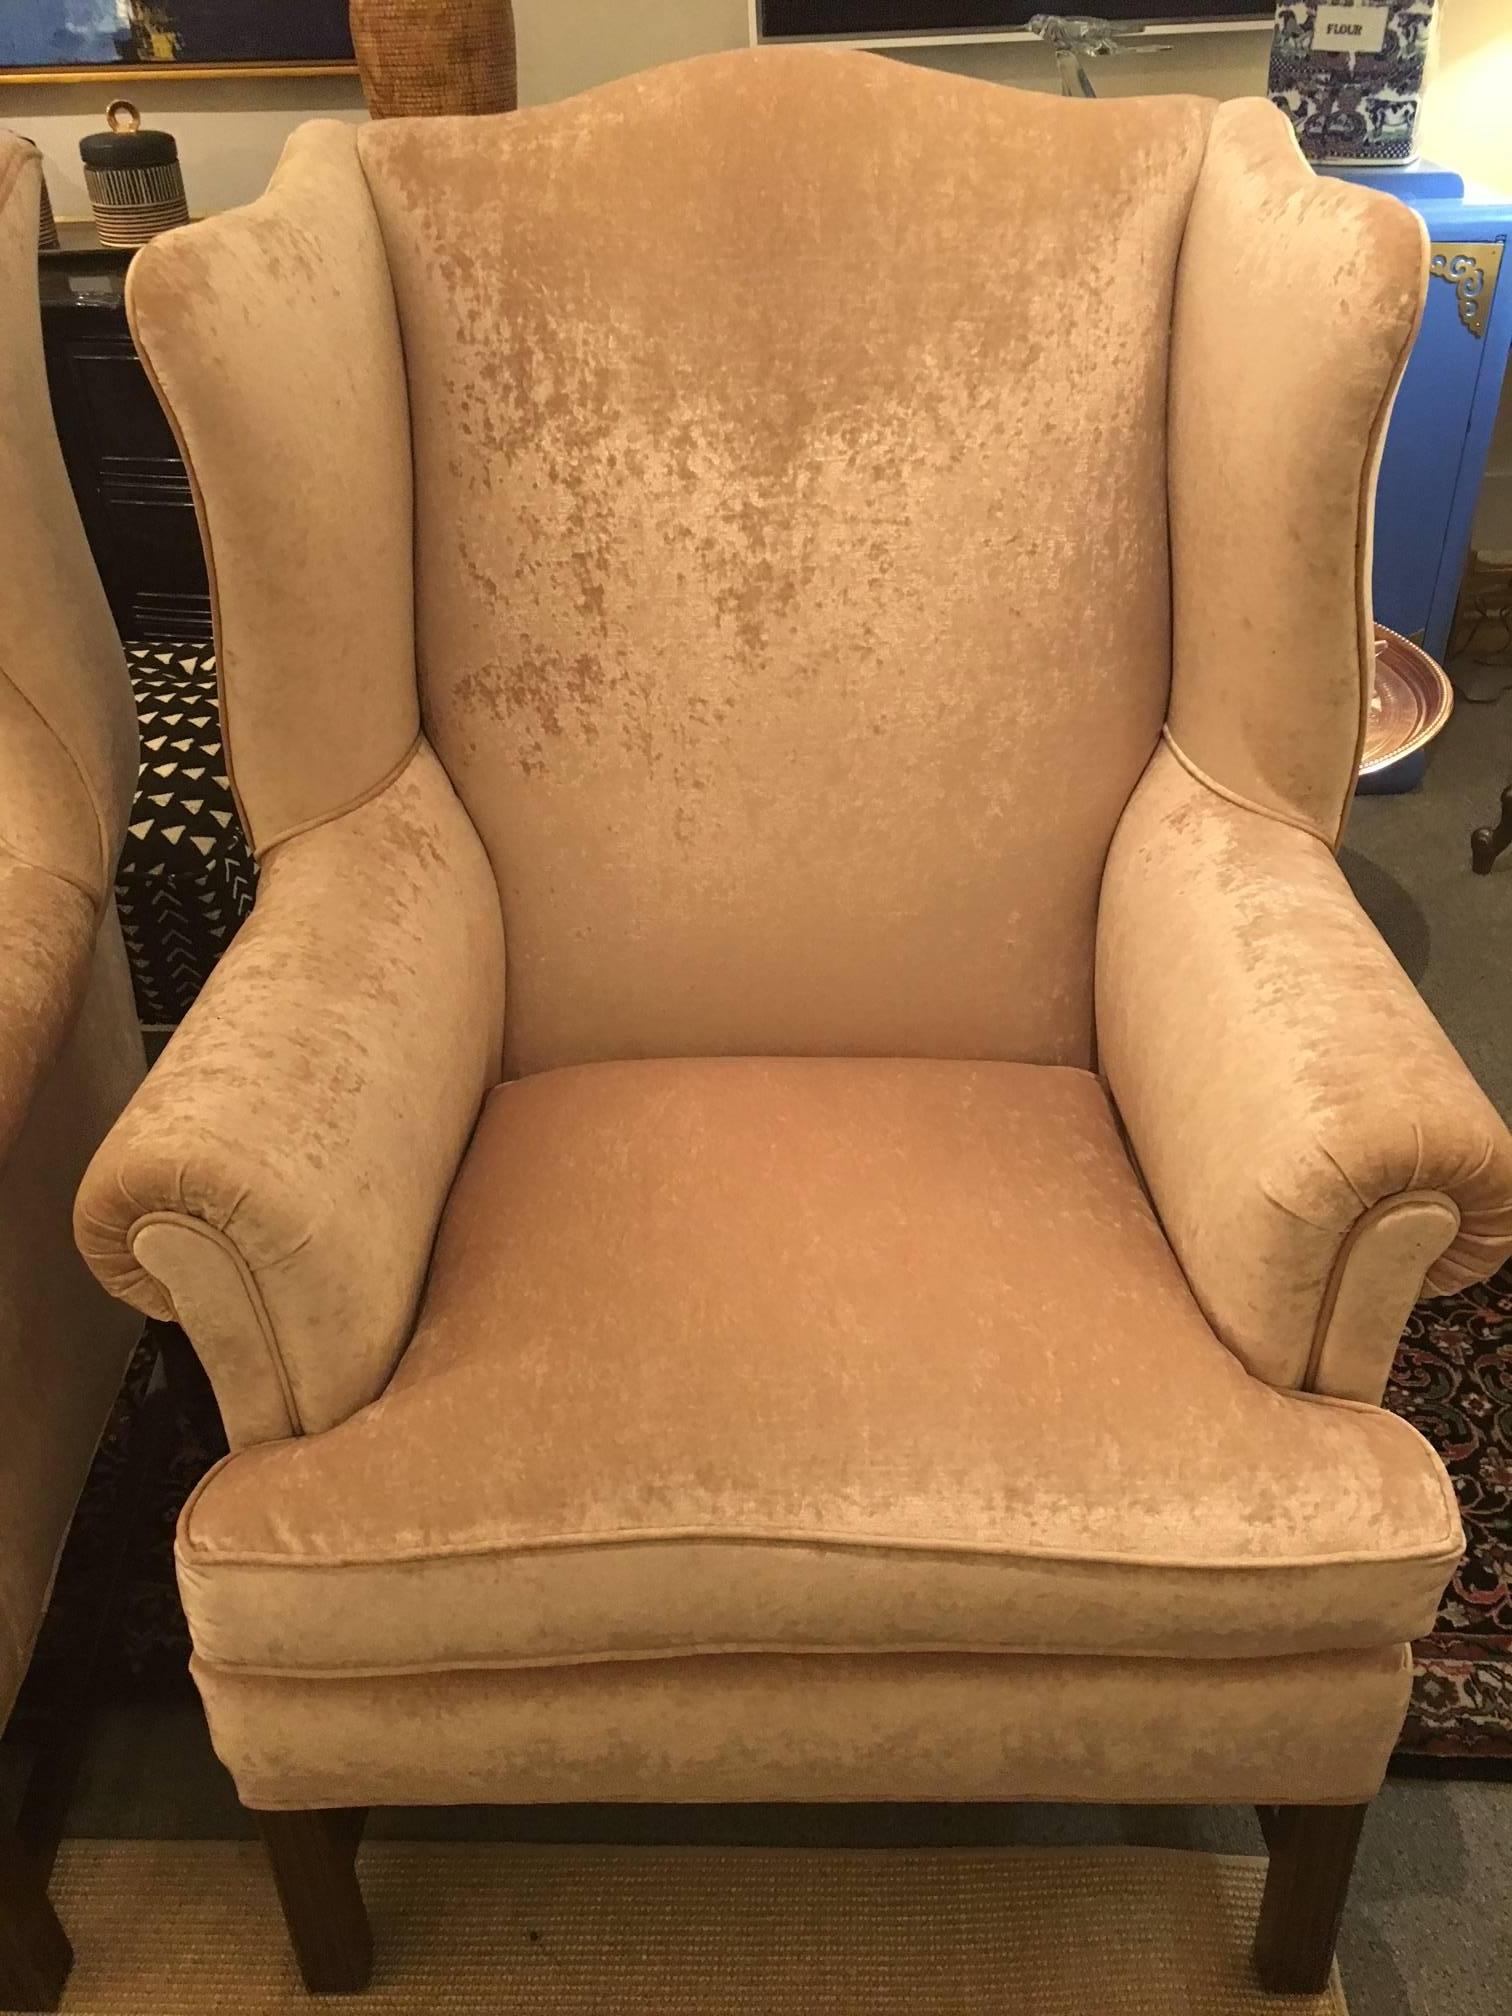 These Classic chairs have just been reupholstered in the loveliest, palest pink- a blush hue. It is hard to capture the color in photos, so please scroll through the pics. The color is best reflected in the photos taken of the side and backs of the